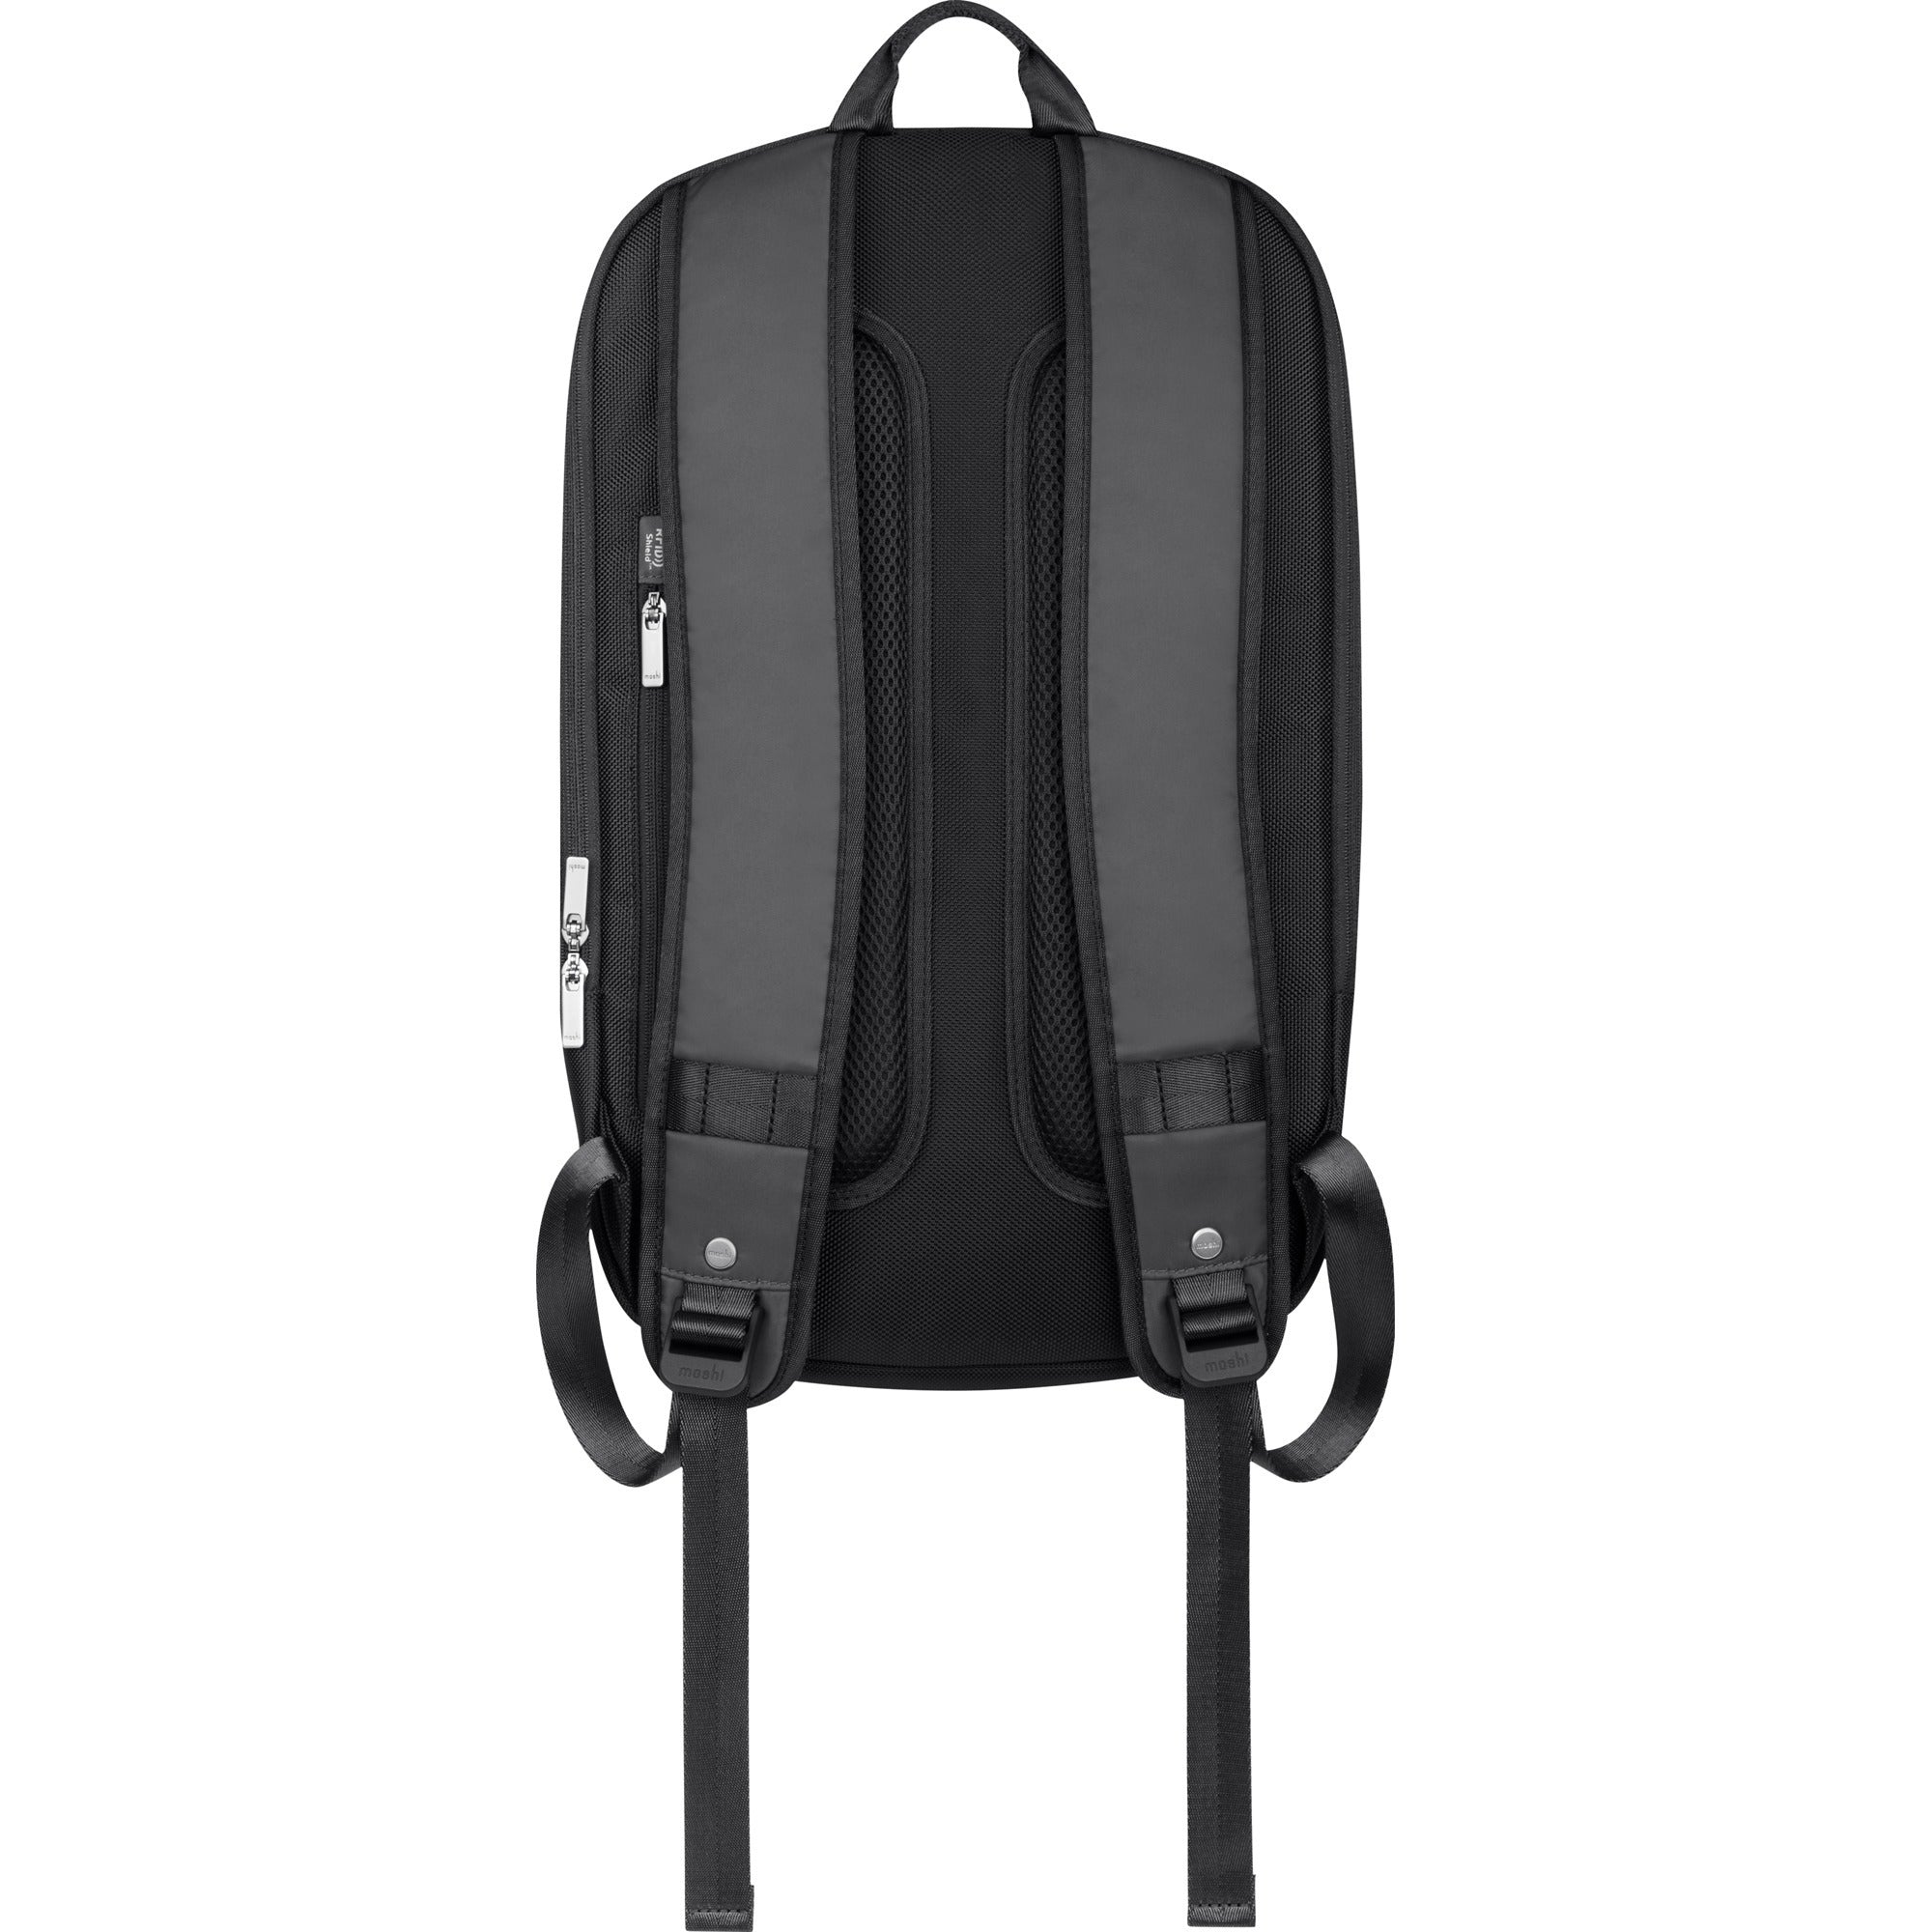 Moshi Hexa Lightweight Backpack - Midnight Black for Laptops up to 15" , Single-panel Construction, Weather-resistant, RFID Pocket